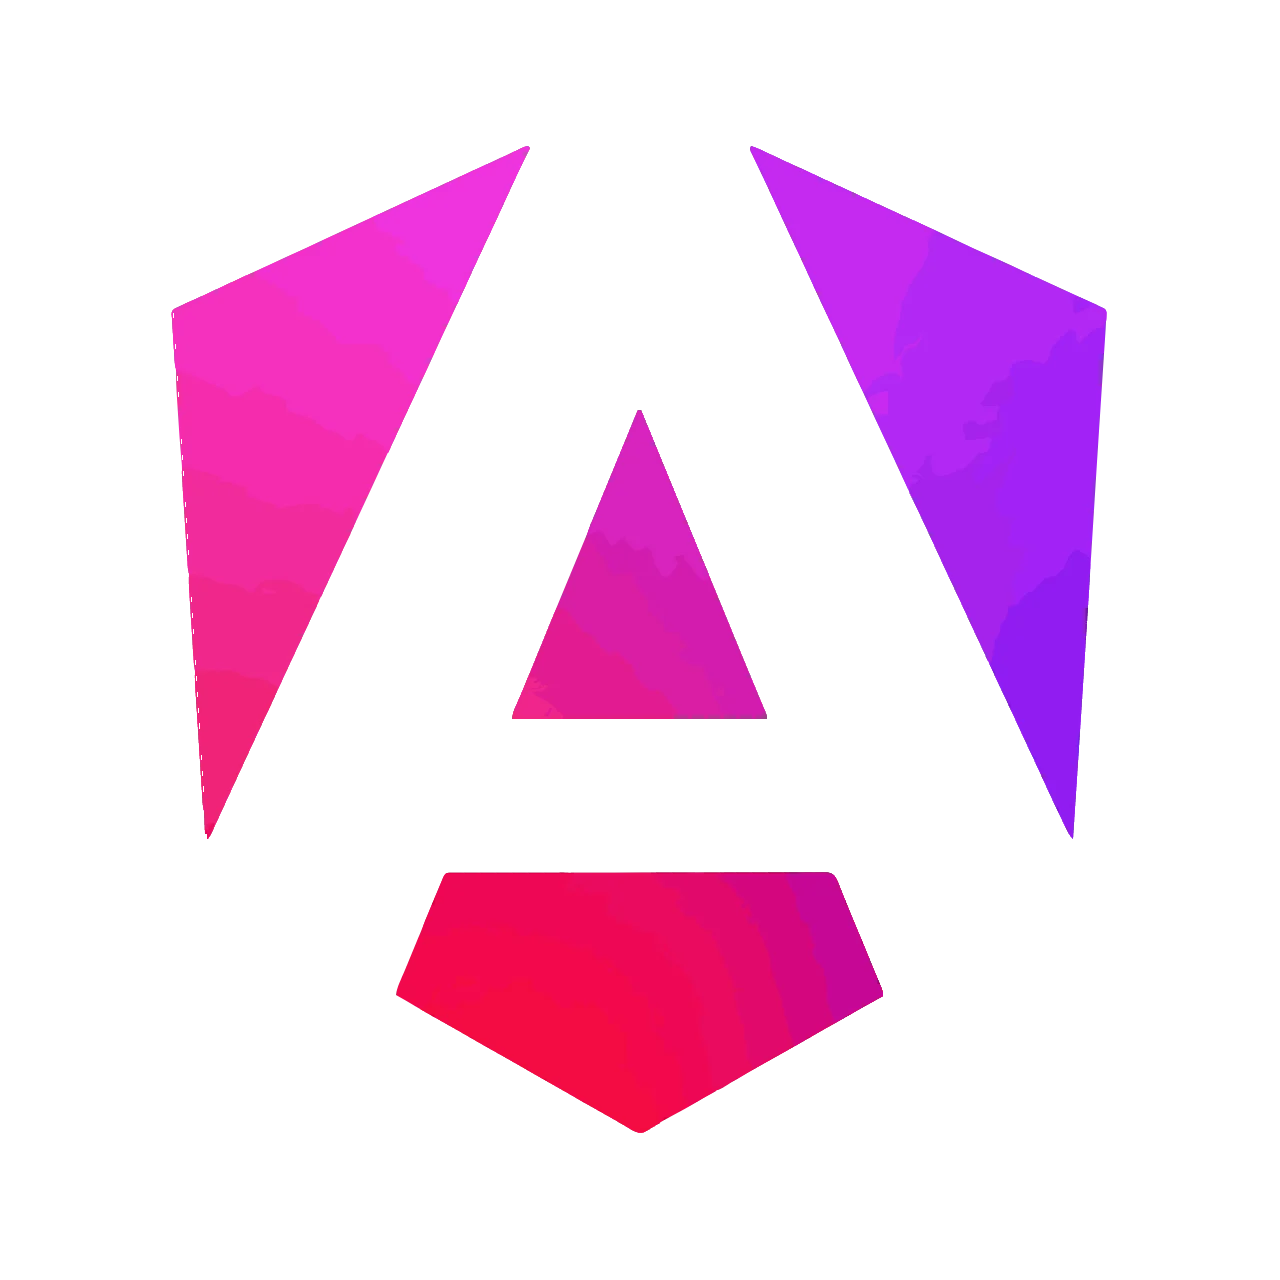 Loading Components Dynamically in Angular 9 with Ivy